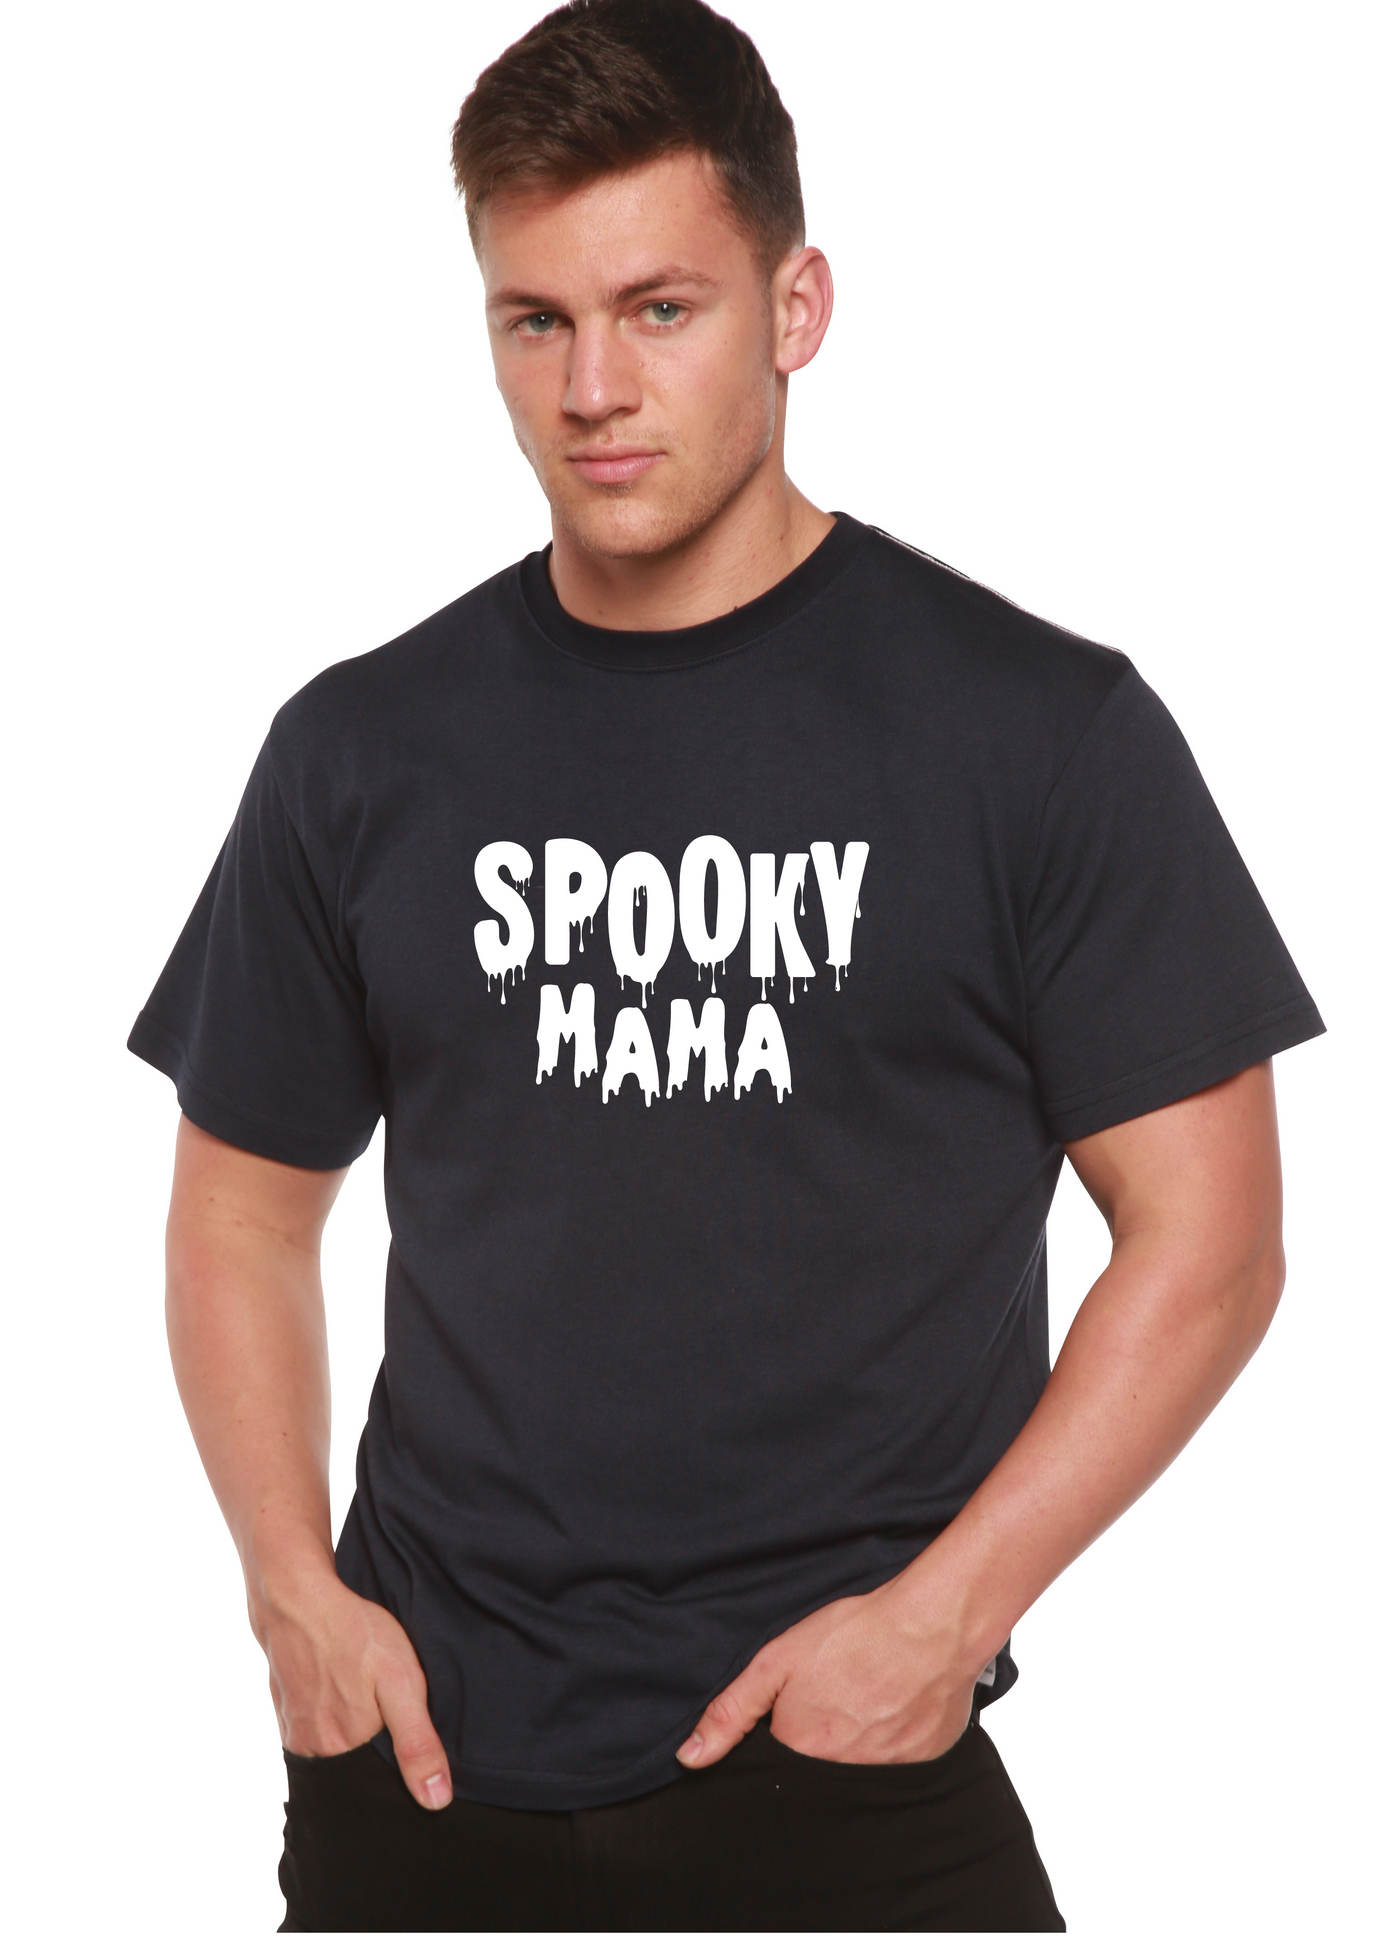 Spooky Mama Graphic Bamboo t-shirt navy blue